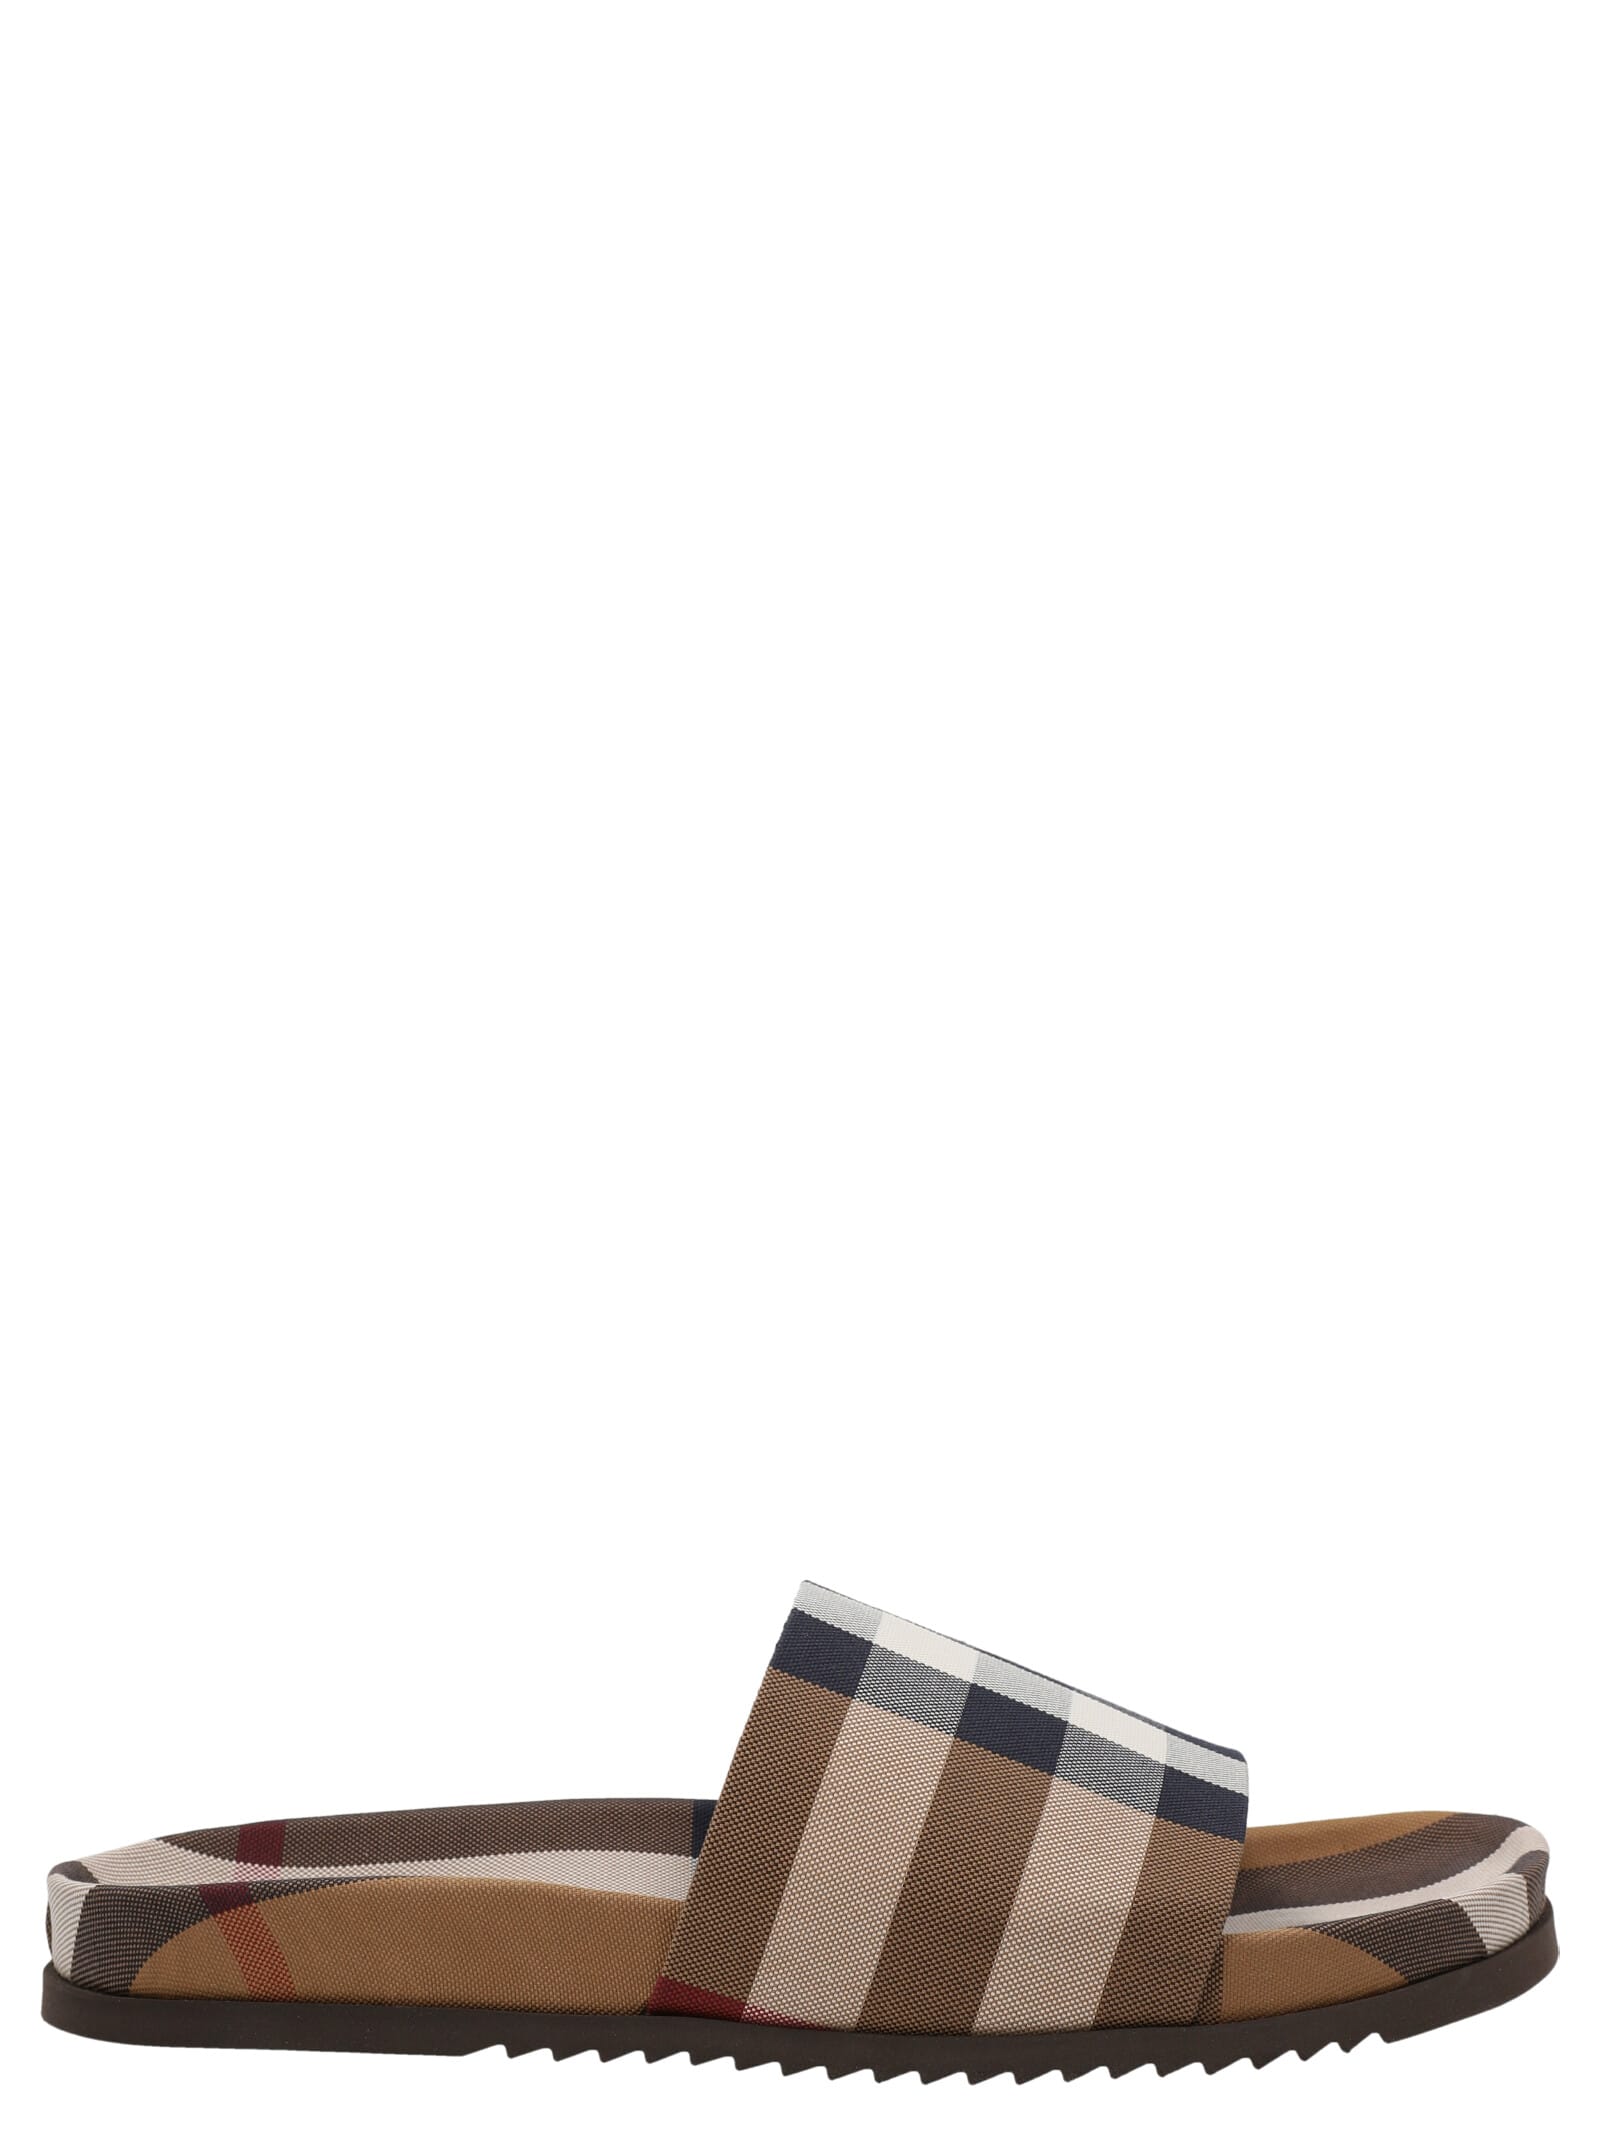 BURBERRY Slides On Sale, Up To 70% Off | ModeSens